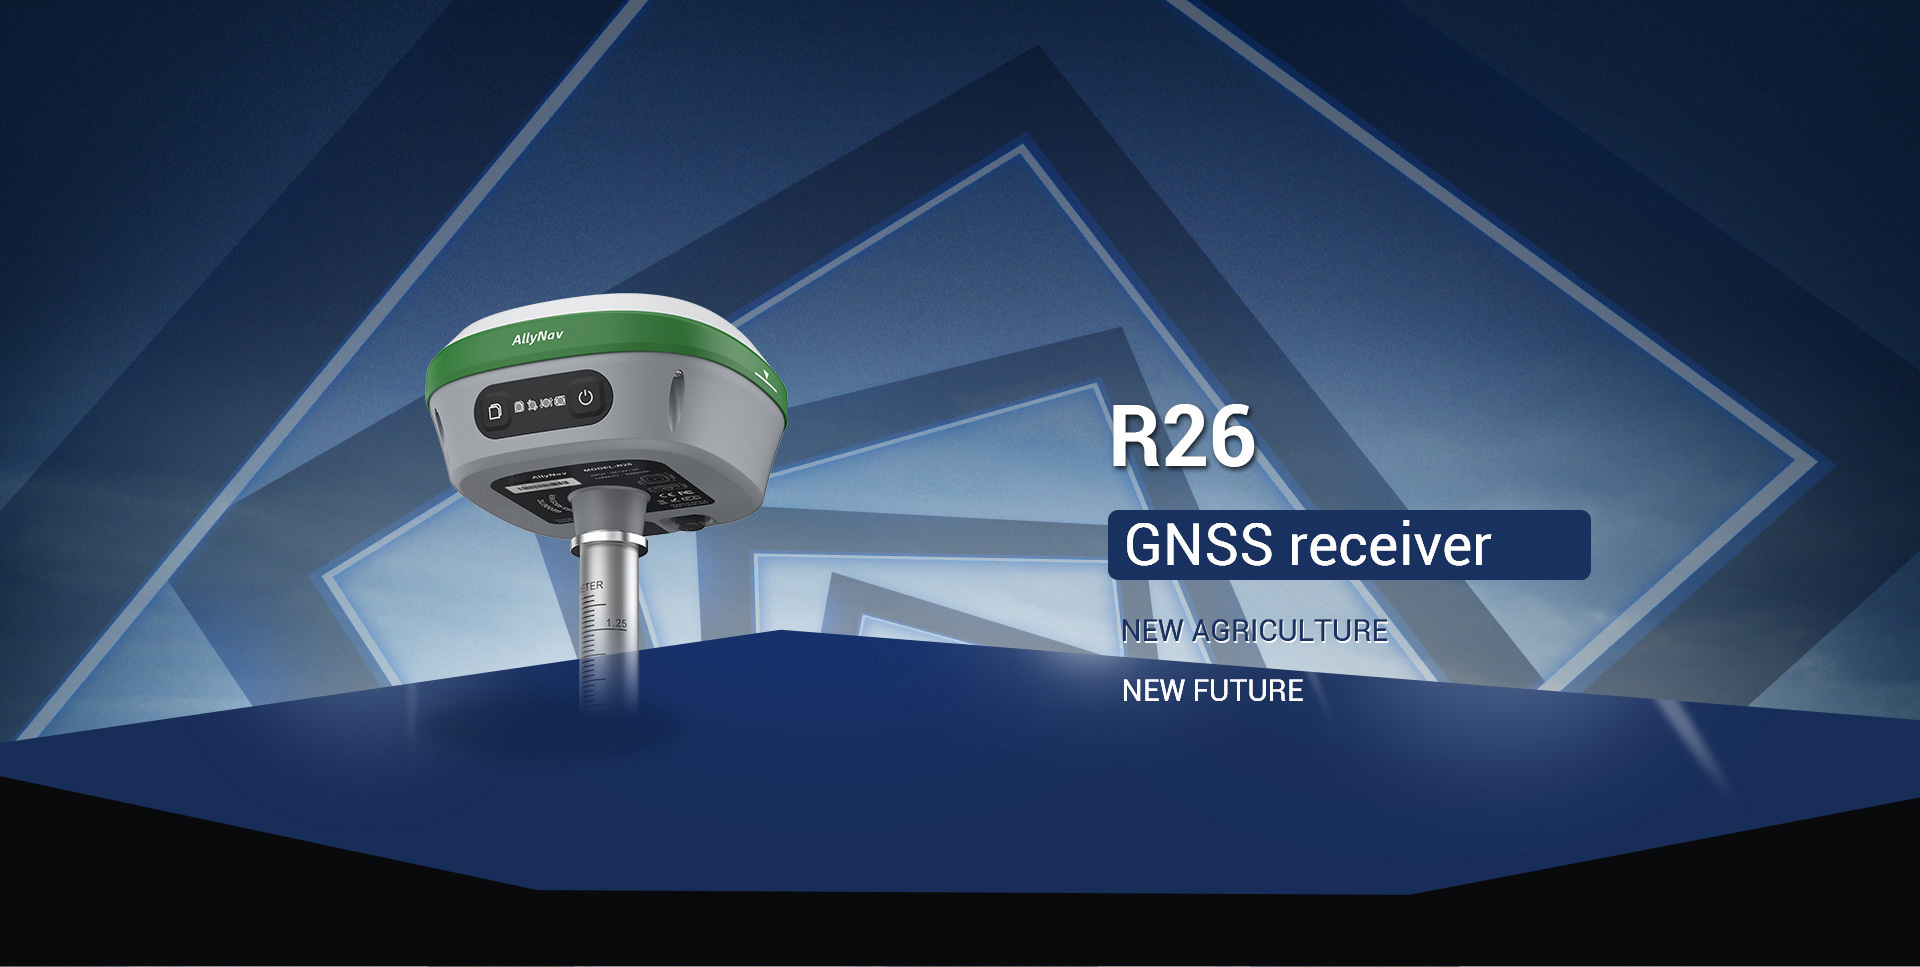 R26 GNSS receiver